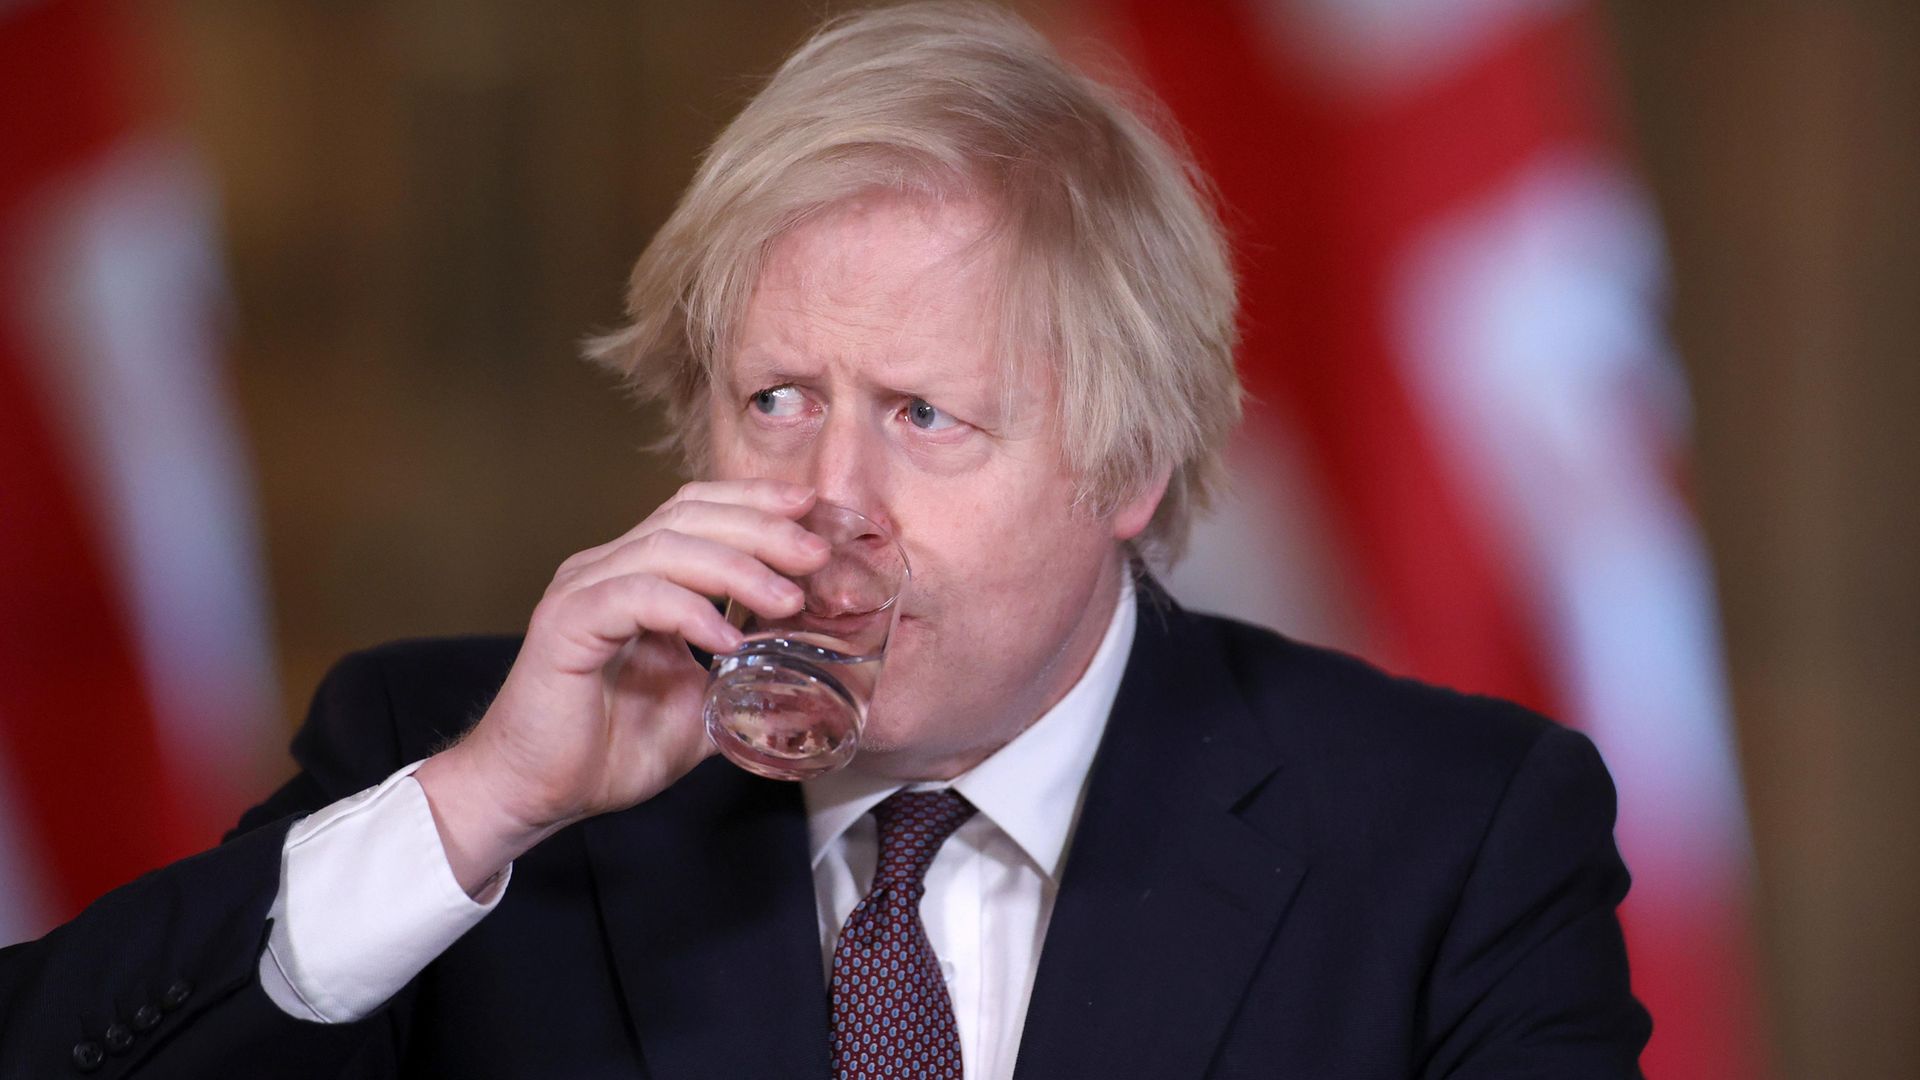 Prime minister Boris Johnson drinks a glass of water during a media briefing in Downing Street, London, on coronavirus (COVID-19) - Credit: PA